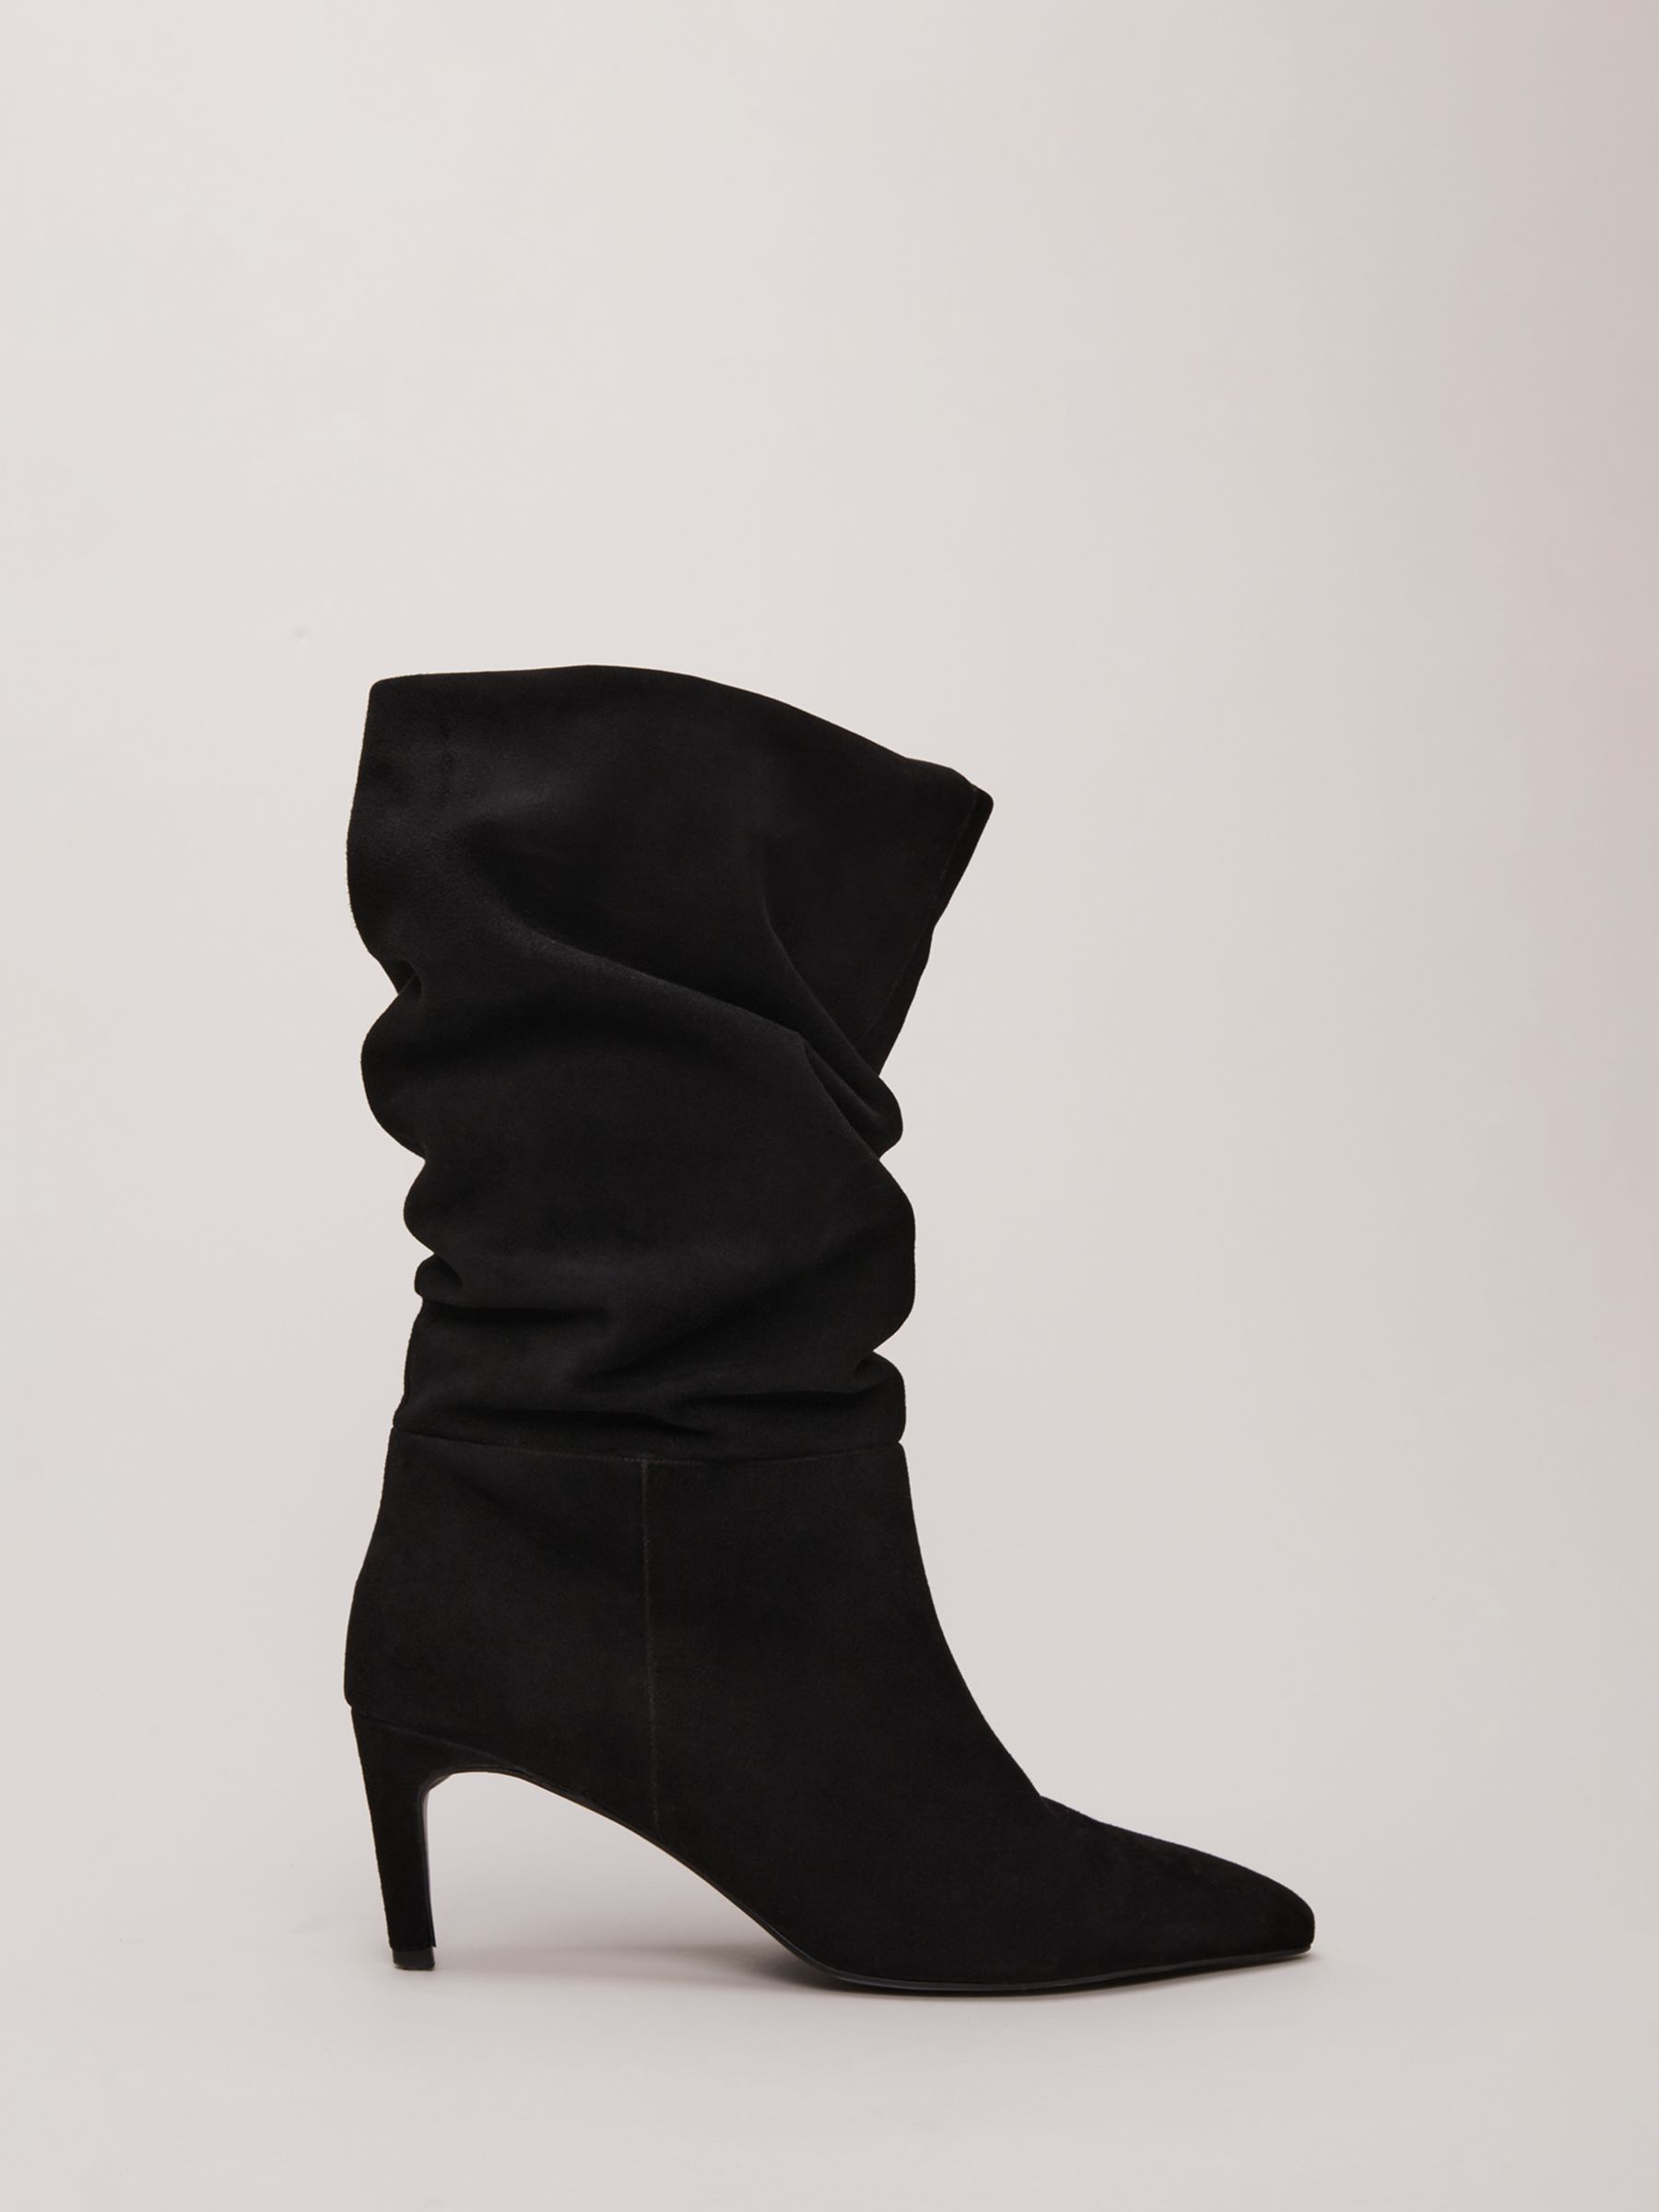 Phase Eight Suede Ruched Boots, Black, EU40